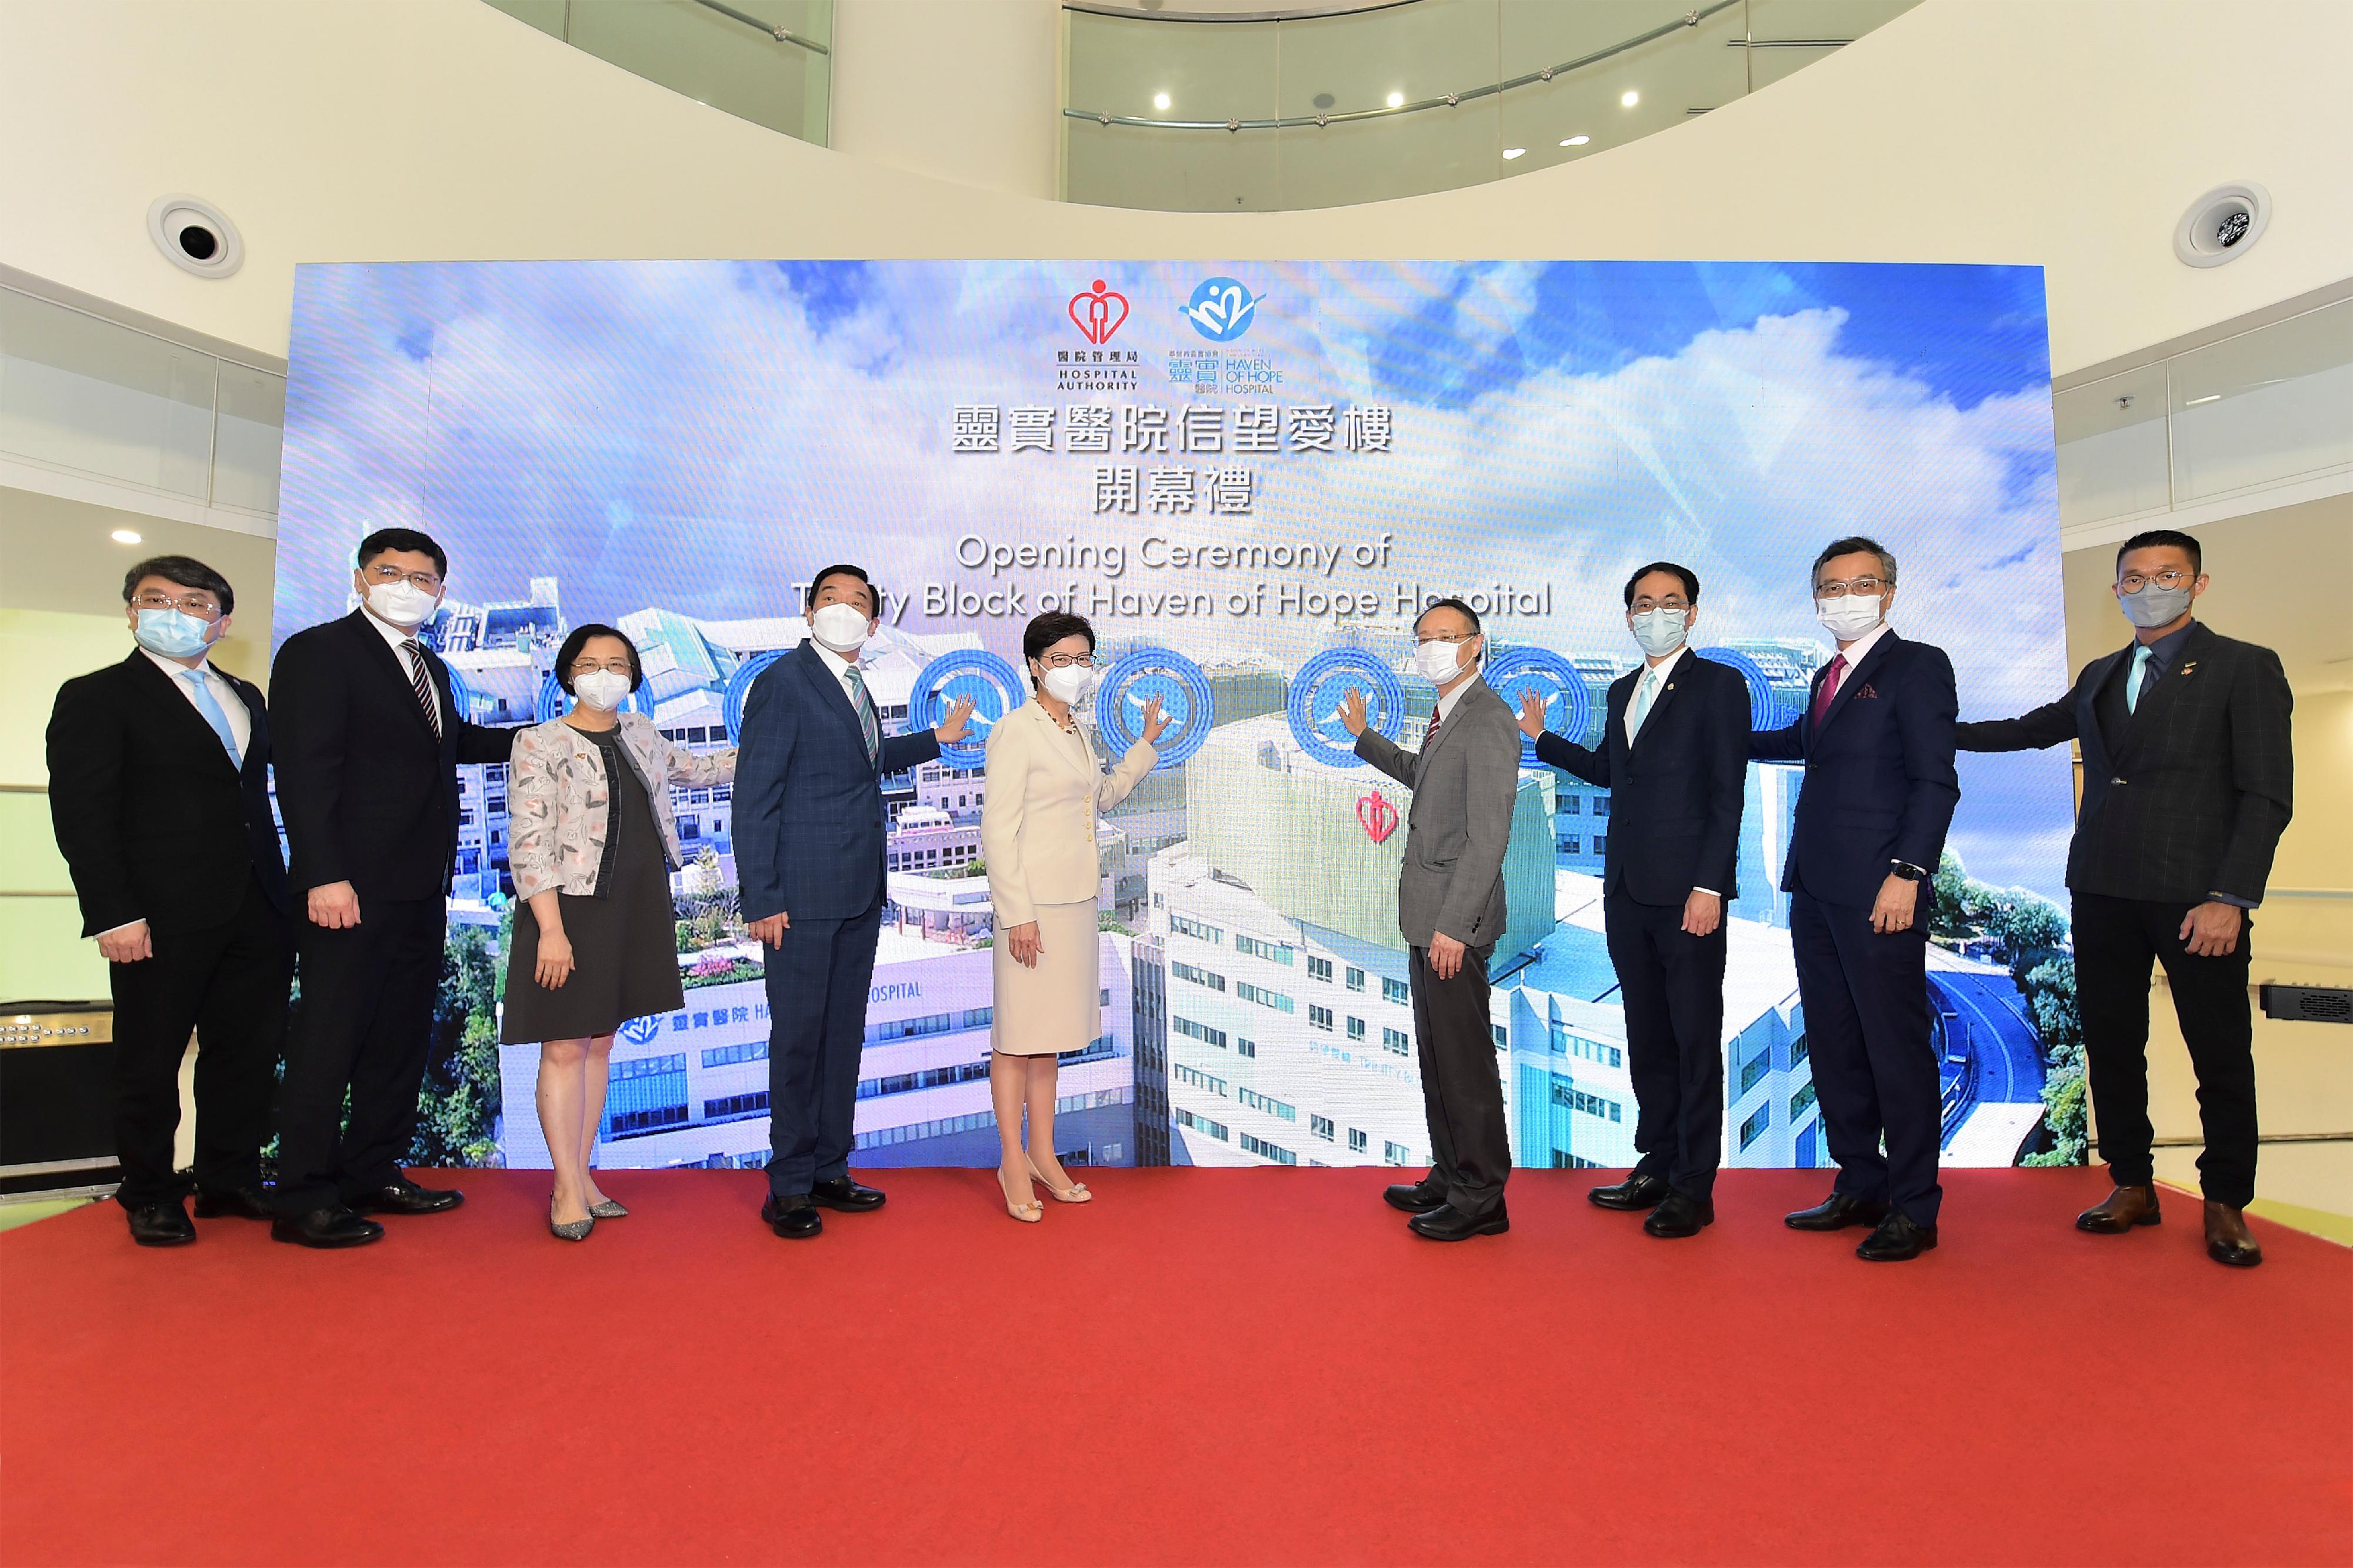 The Chief Executive, Mrs Carrie Lam, officiated at the opening ceremony of Trinity Block of Haven of Hope Hospital (HHH) today (June 15). Photo shows (from left) the Cluster Chief Executive of Kowloon East Cluster, Dr Deacons Yeung; the Chief Executive of the Hospital Authority (HA), Dr Tony Ko; the Secretary for Food and Health, Professor Sophia Chan; the Chairman of the HA, Mr Henry Fan; Mrs Lam; the Chairman of the Hospital Governing Committee of HHH, Professor Joseph Kwan; the Chairman of the Sai Kung District Council, Mr Francis Chau ; the Chief Executive Officer of Haven of Hope Christian Service, Dr Lam Ching-choi; and the Hospital Chief Executive of Tseung Kwan O Hospital and Haven of Hope Hospital, Dr Kenny Yuen, at the opening ceremony.
 
